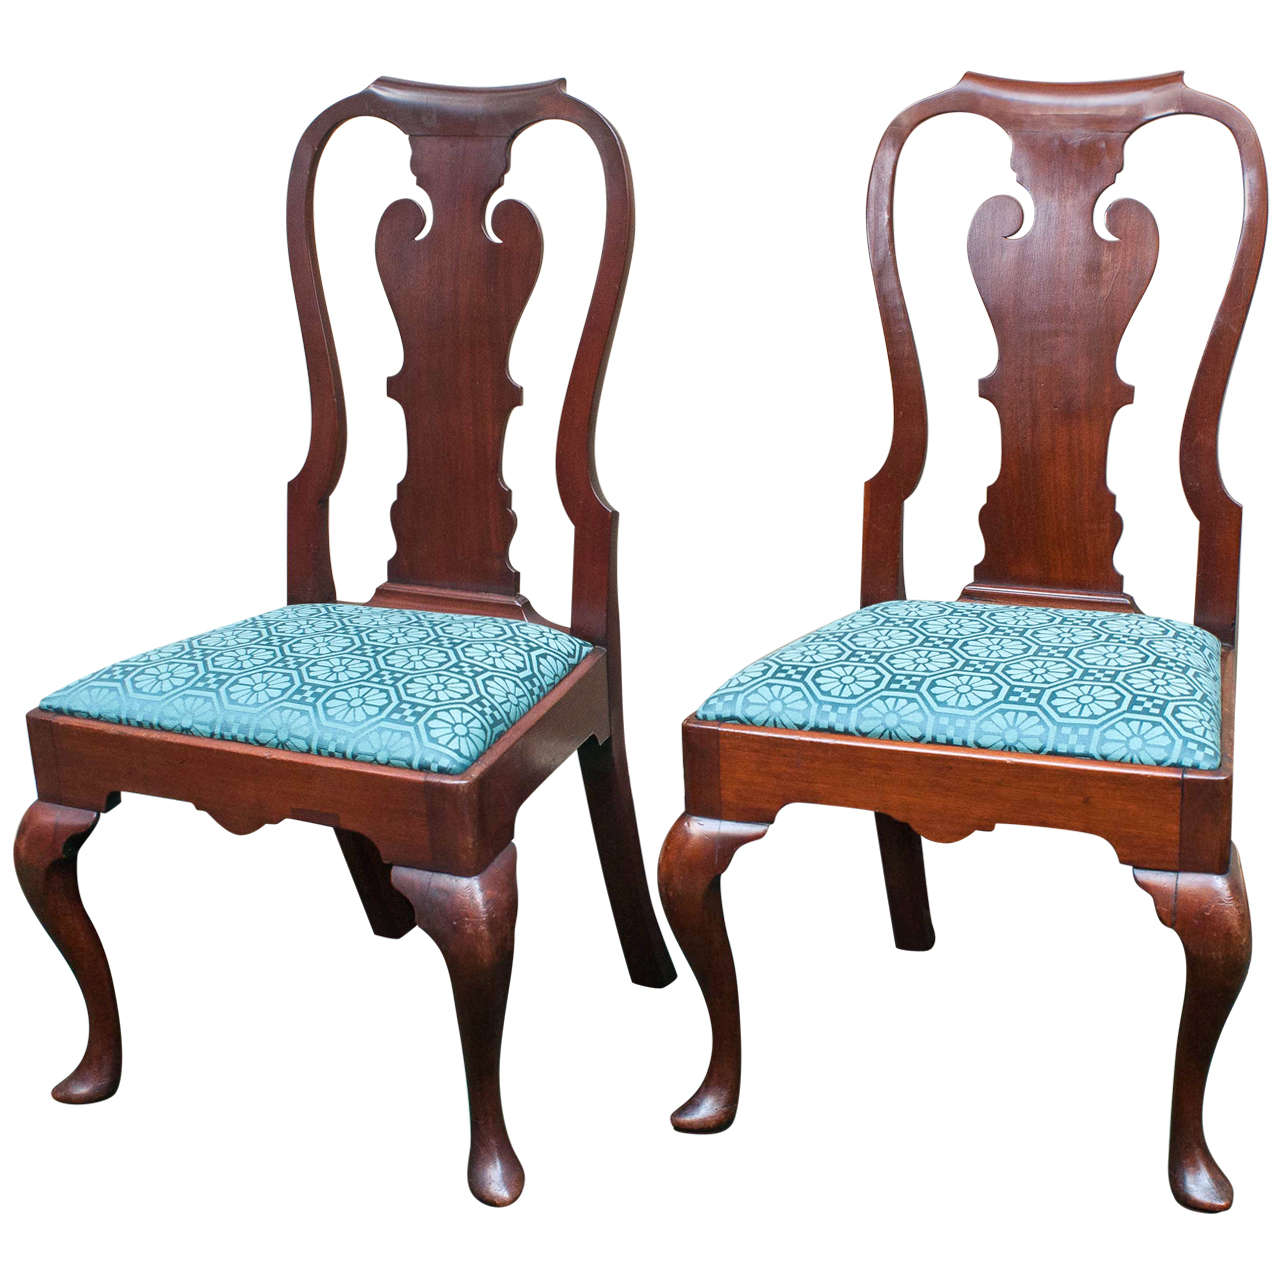 Excellent Pair of Queen Anne Side Chairs